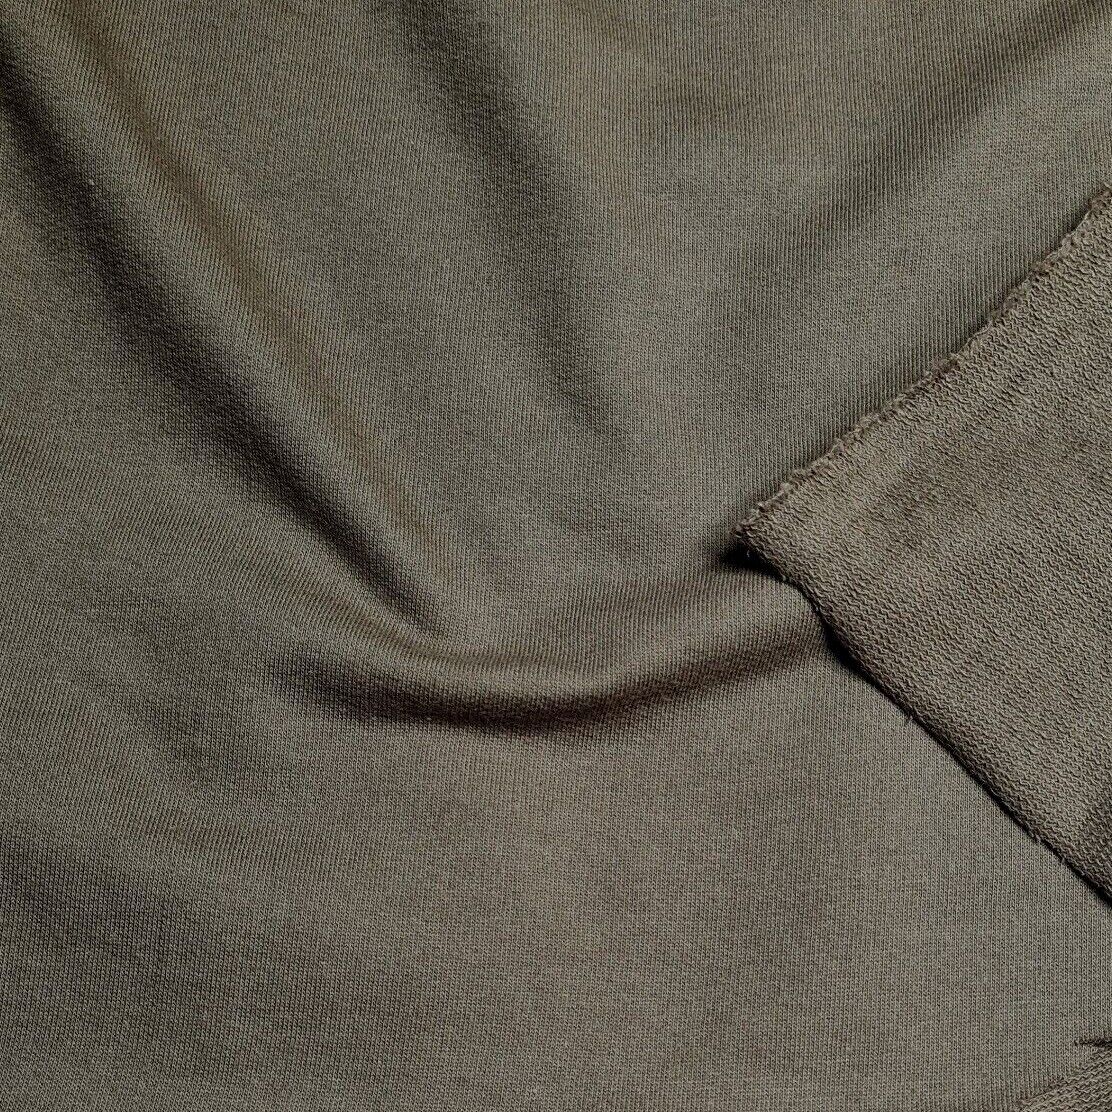 Cotton Sweatshirt Knit Fabric Light Weight Brown Colour 55" Wide